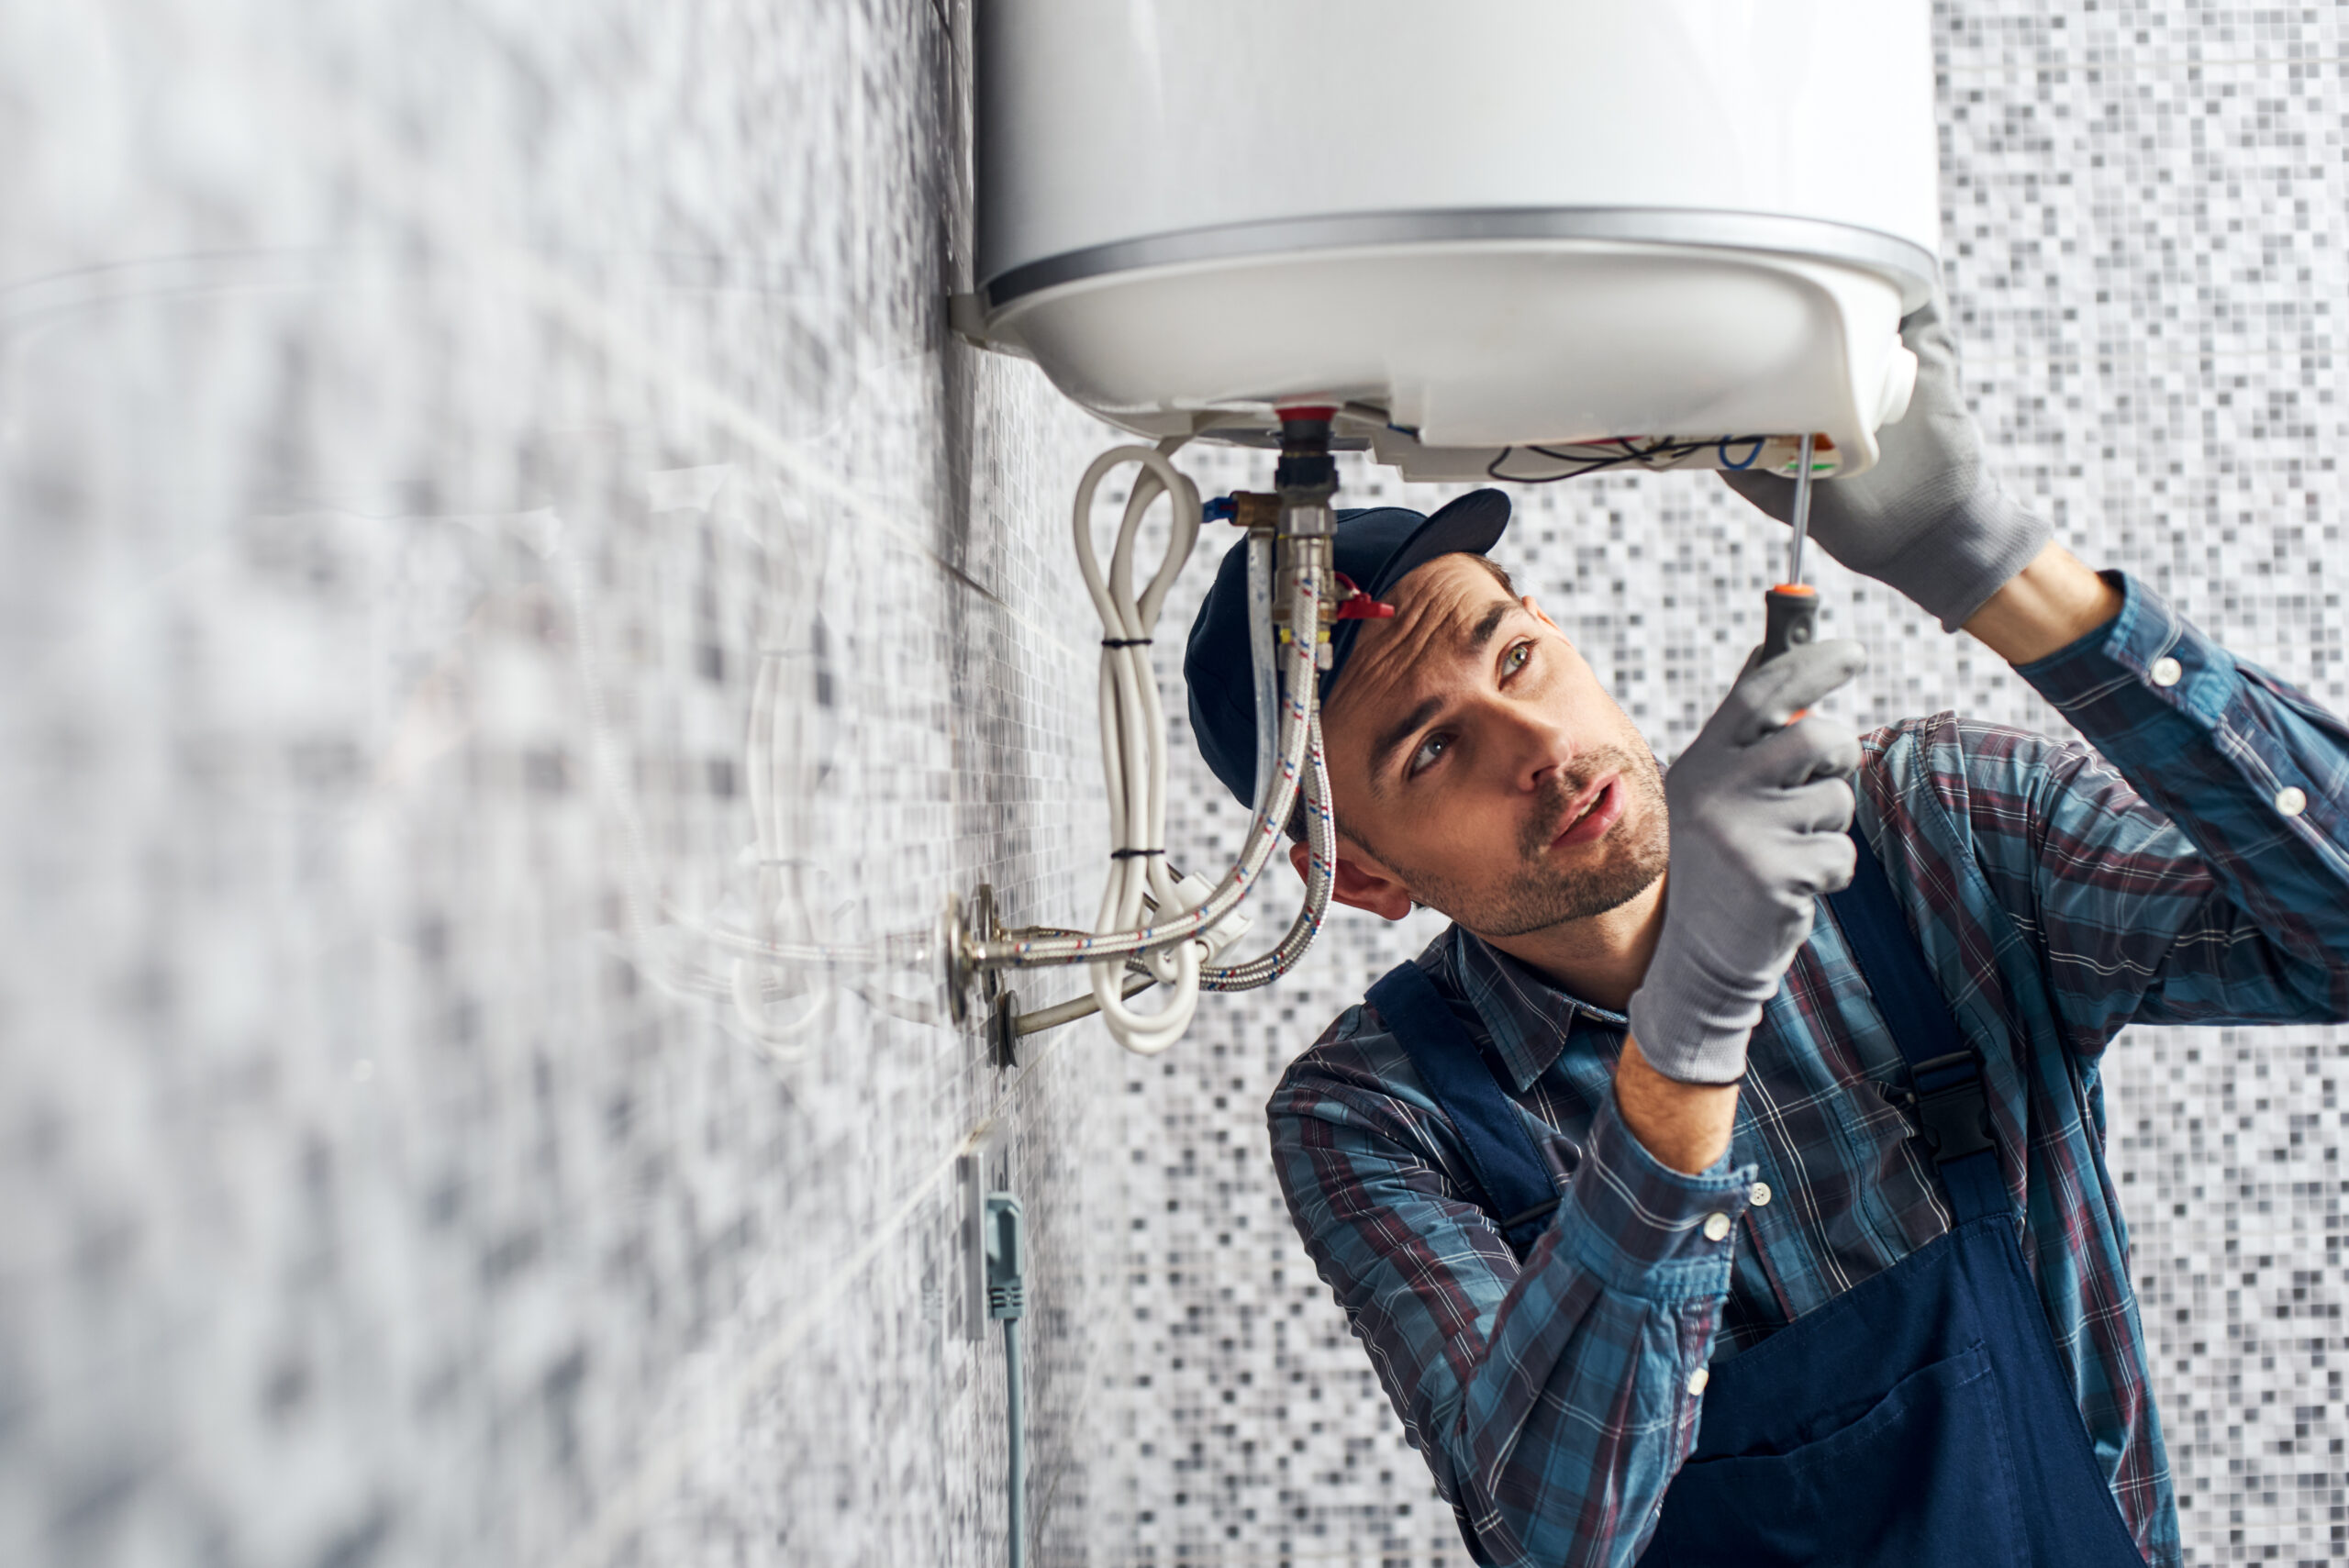 A plumber working on a hot water system with a screwdriver